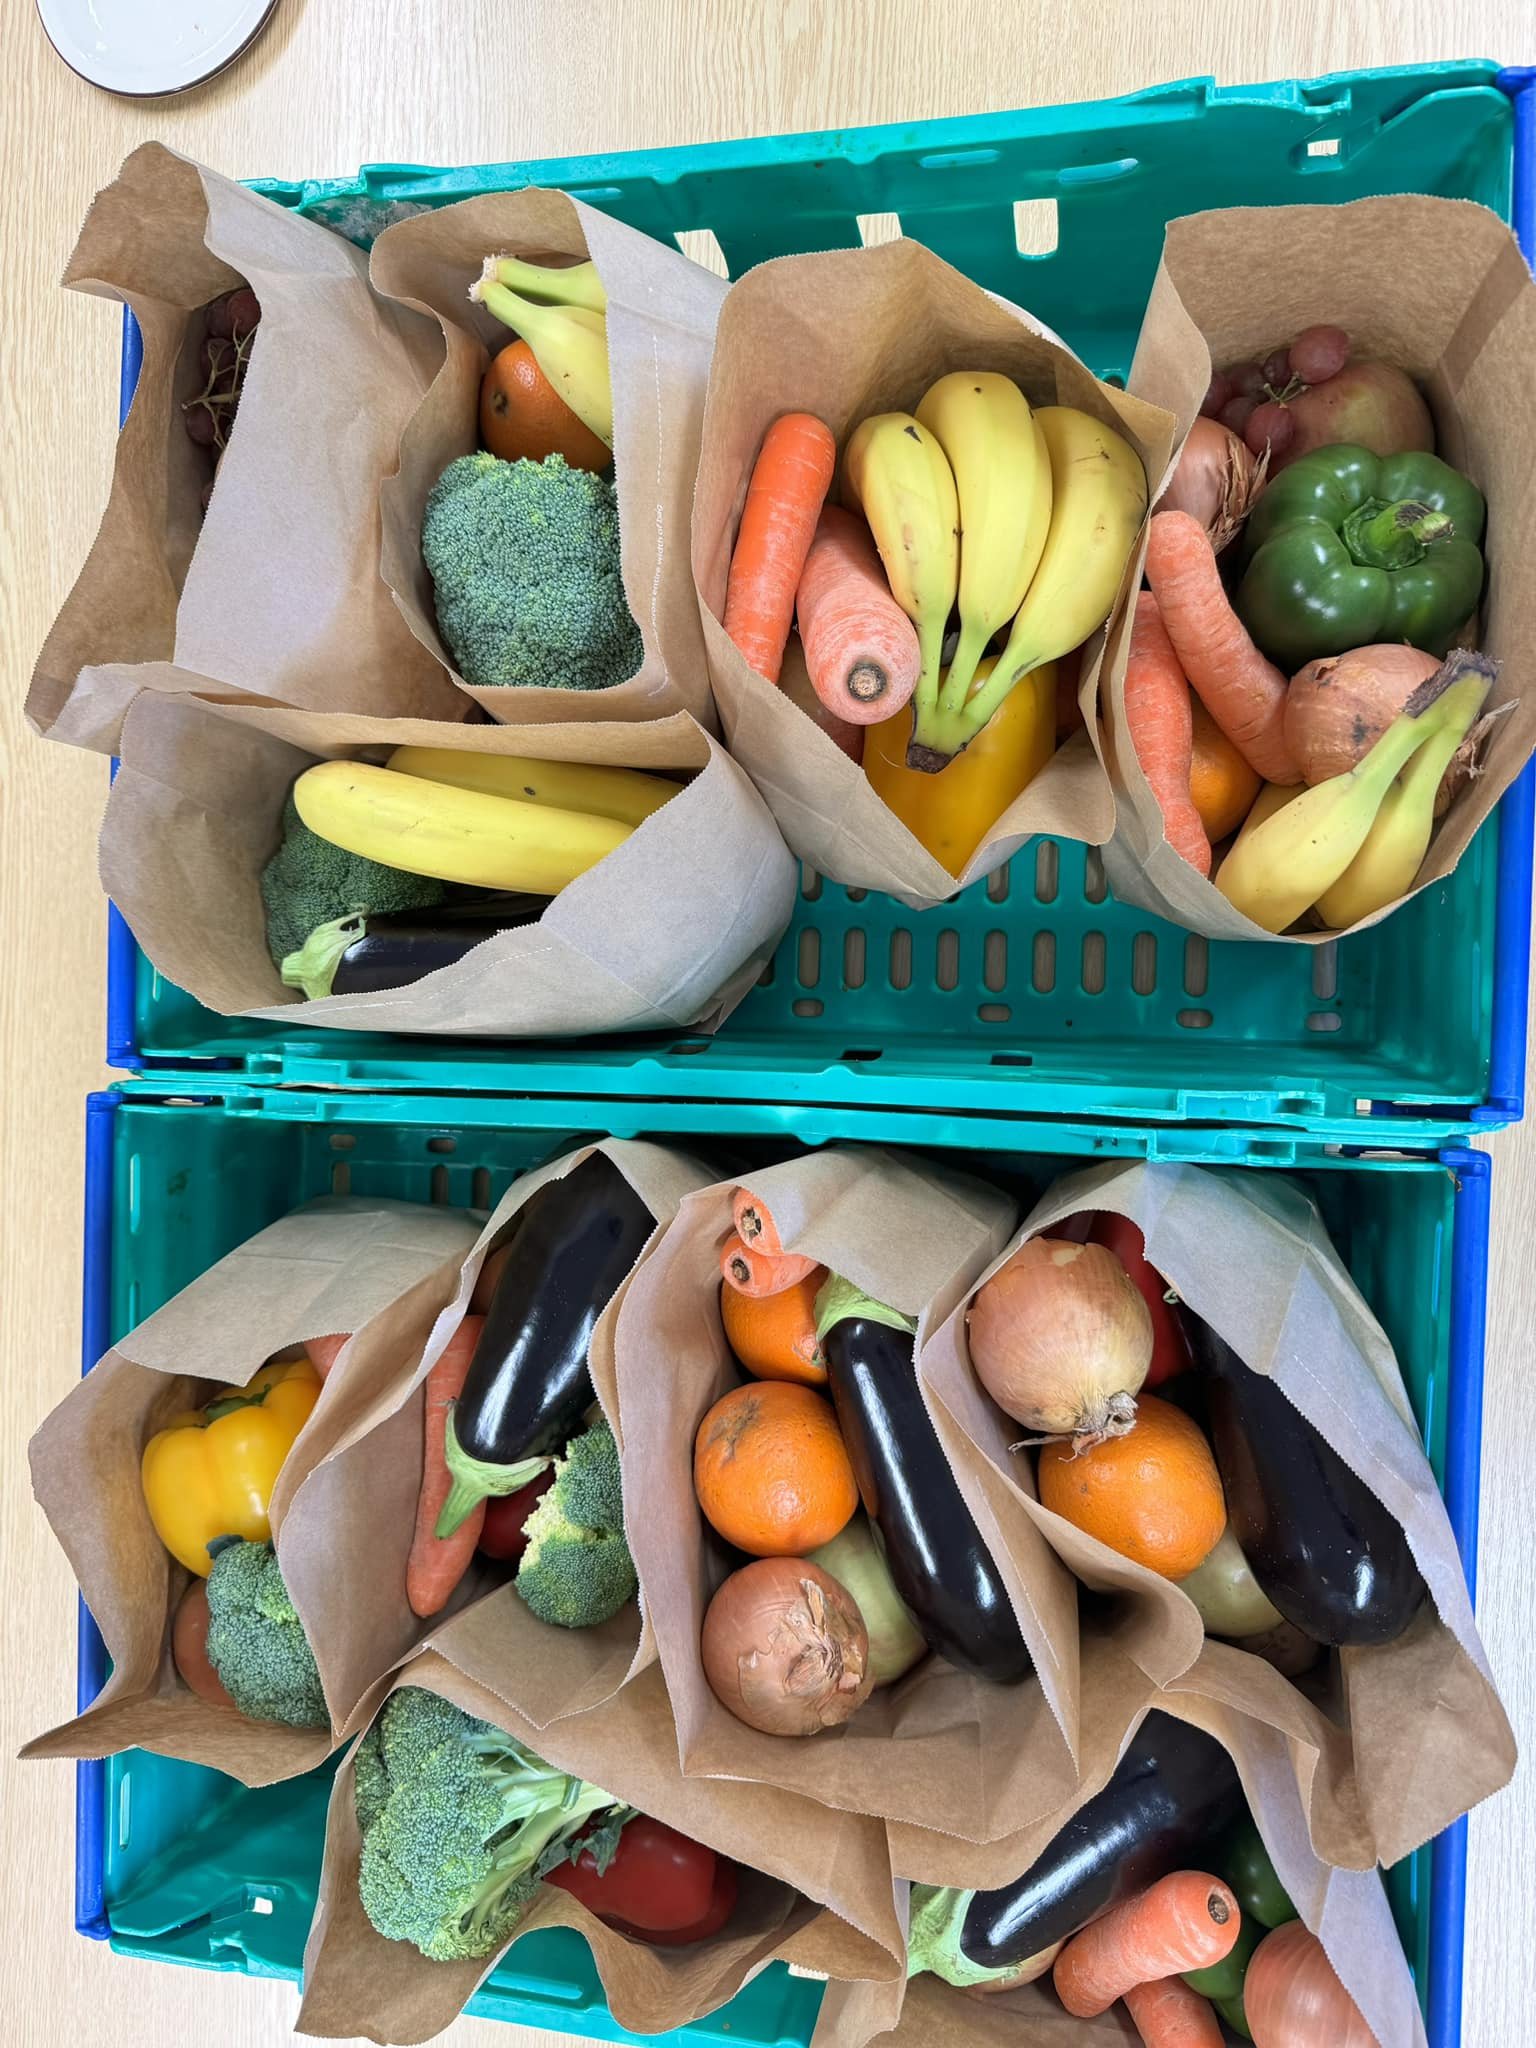 Donated from Can You See Me CIC

Free Fruit and Vegetables bags available from the centre. Please pop up, limited available.